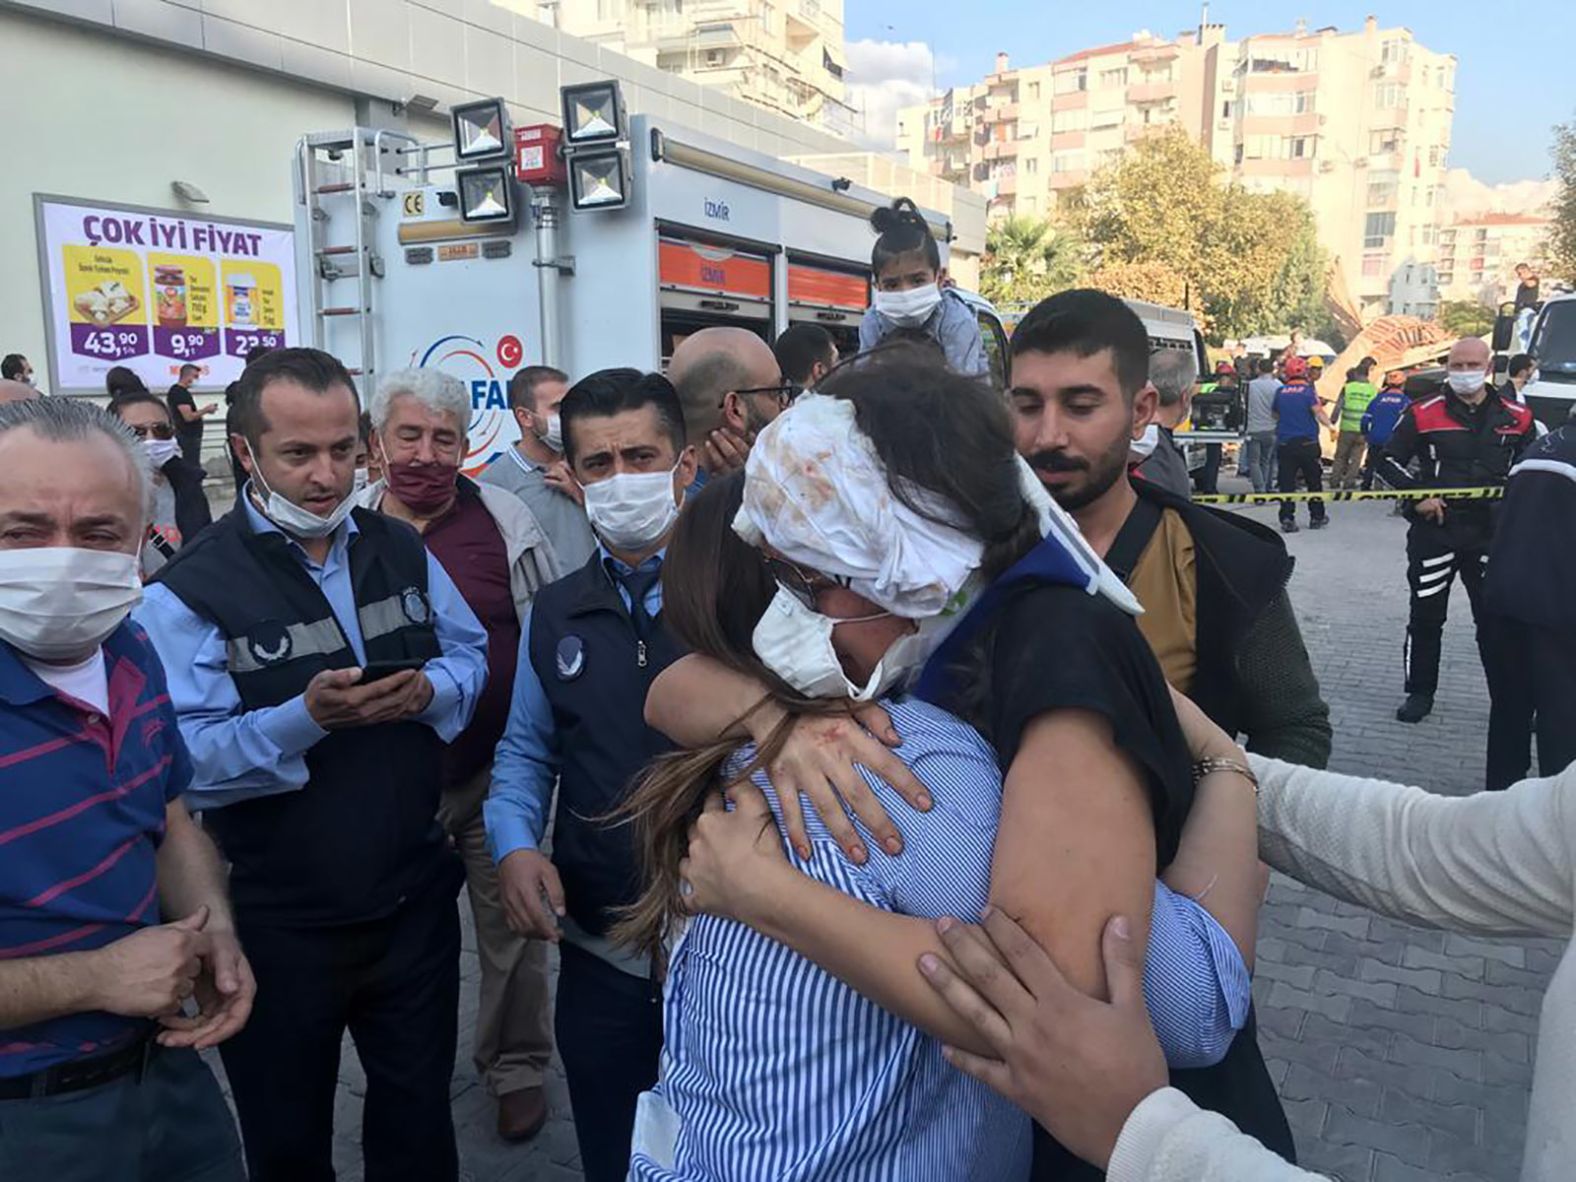 A wounded woman hugs a relative after being rescued from a building in Izmir.